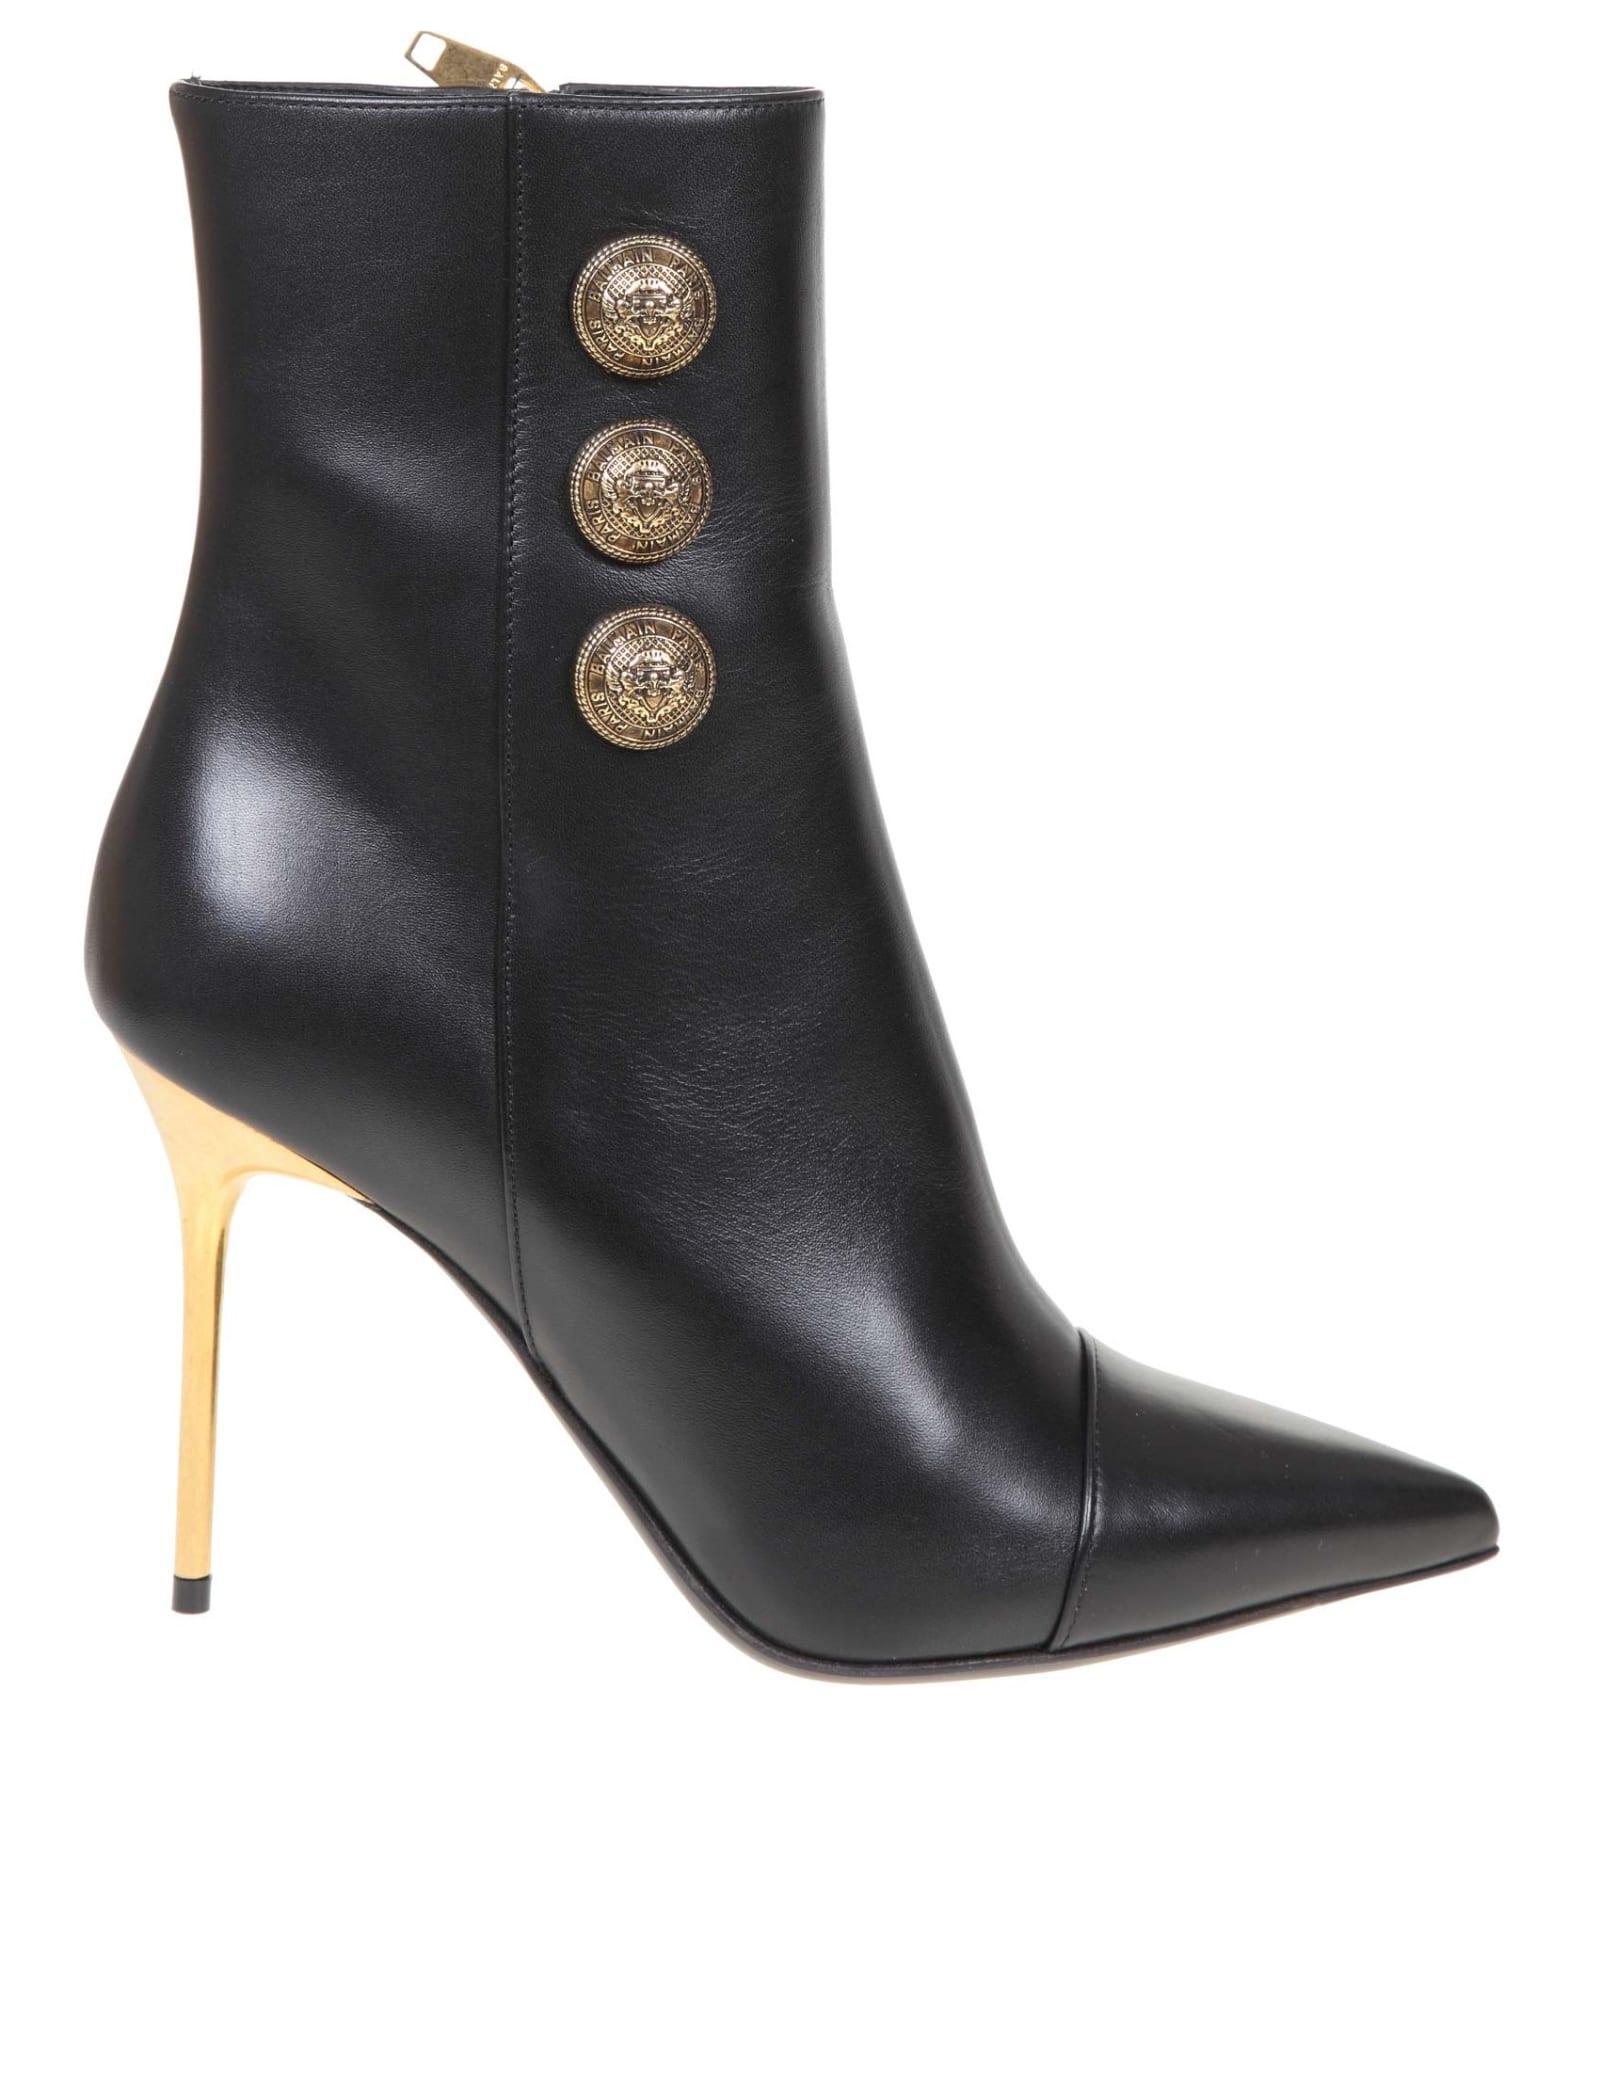 Balmain Roni Boots In Black Leather | Lyst